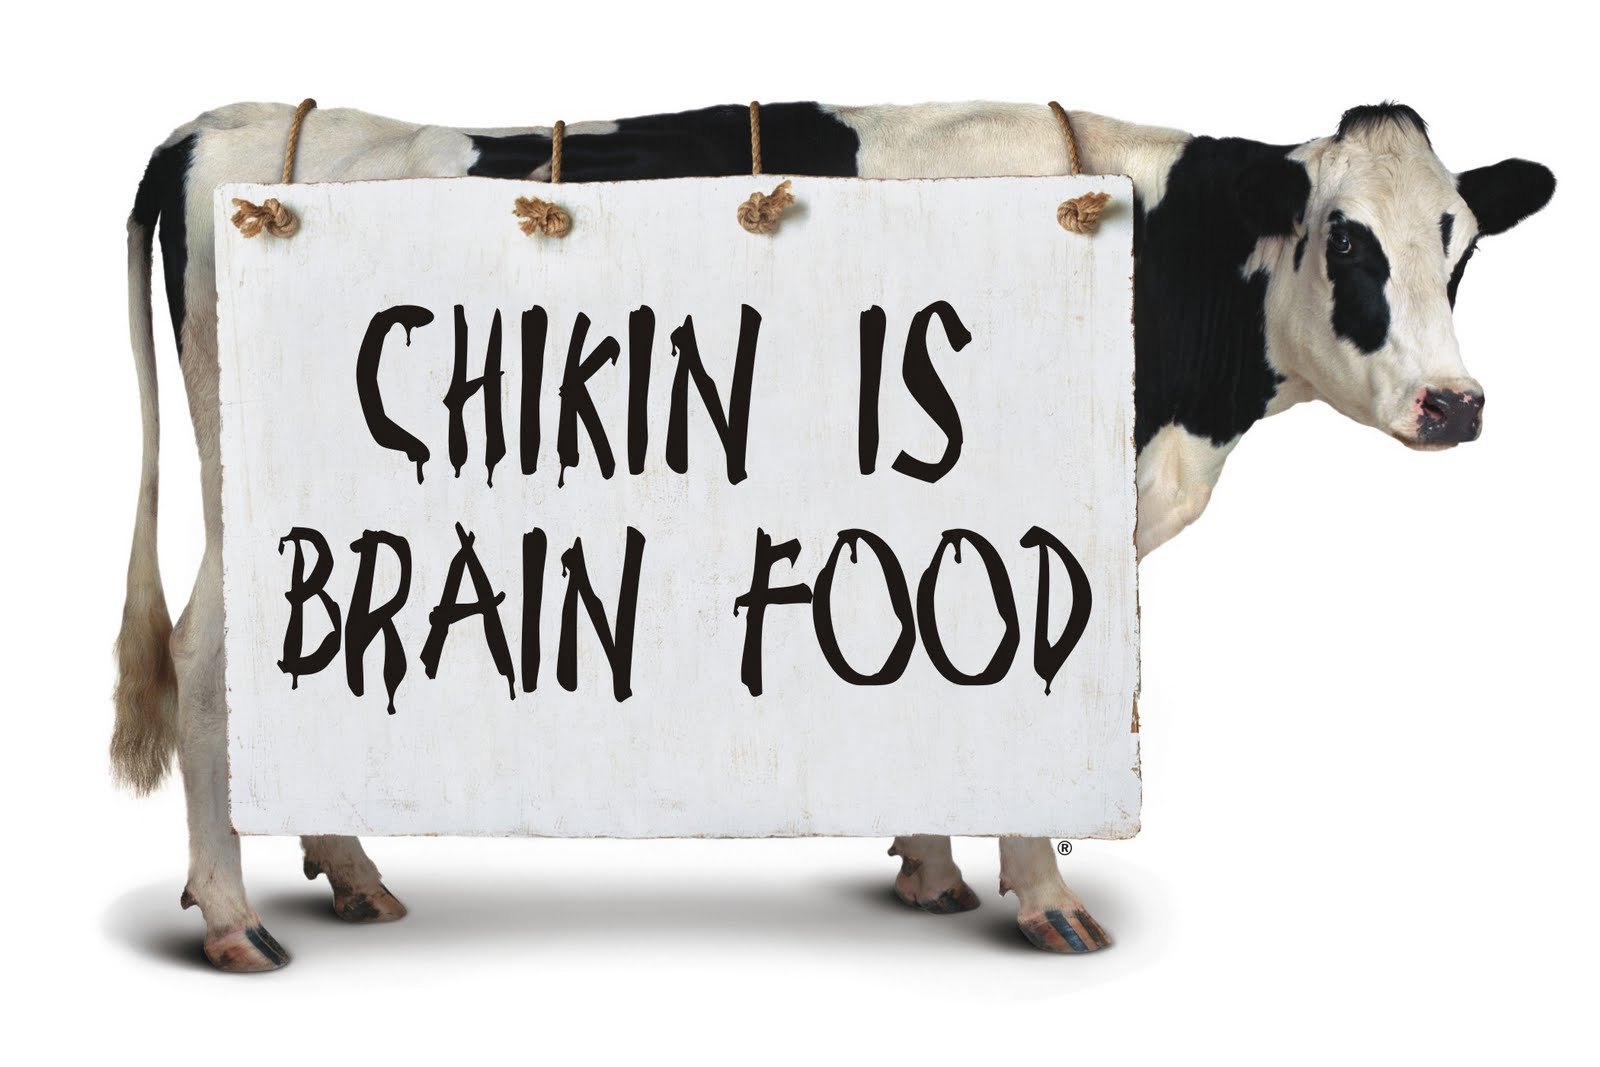 Chick fil a cow clipart